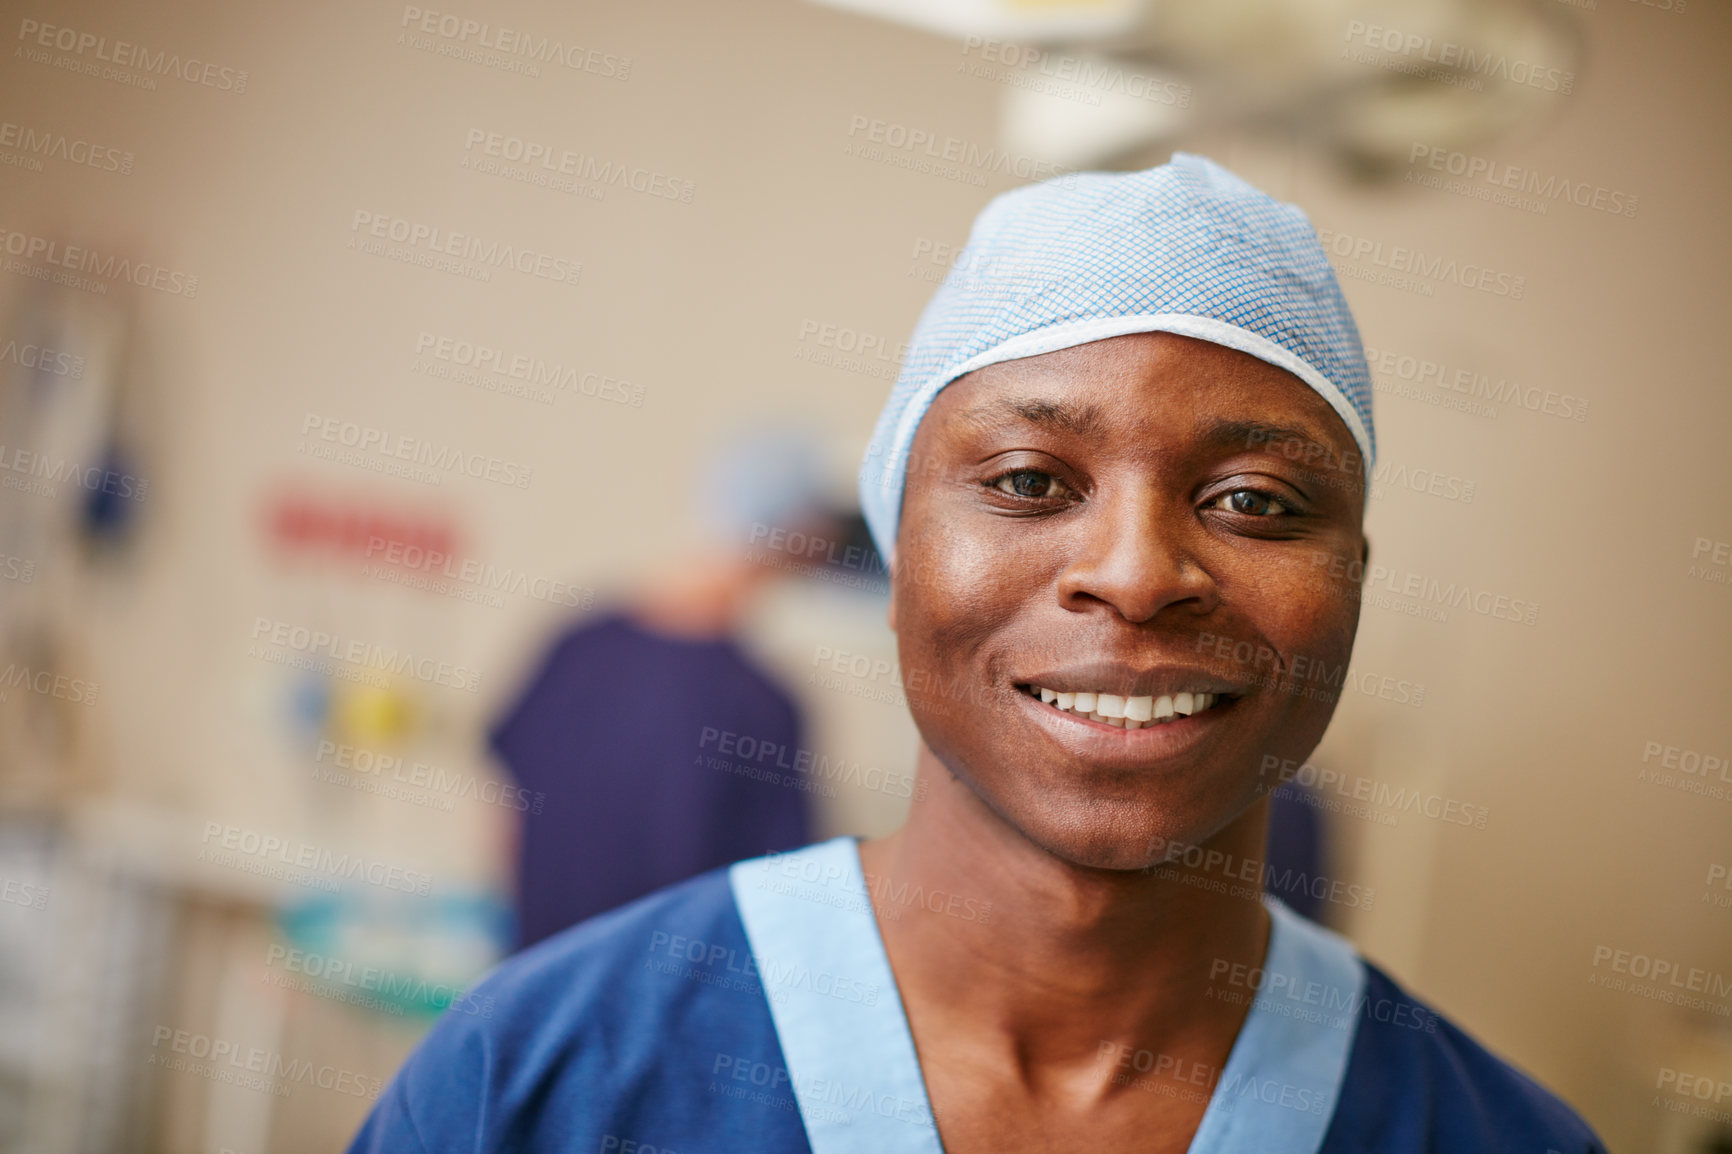 Buy stock photo Portrait of a confident surgeon standing in an operating room